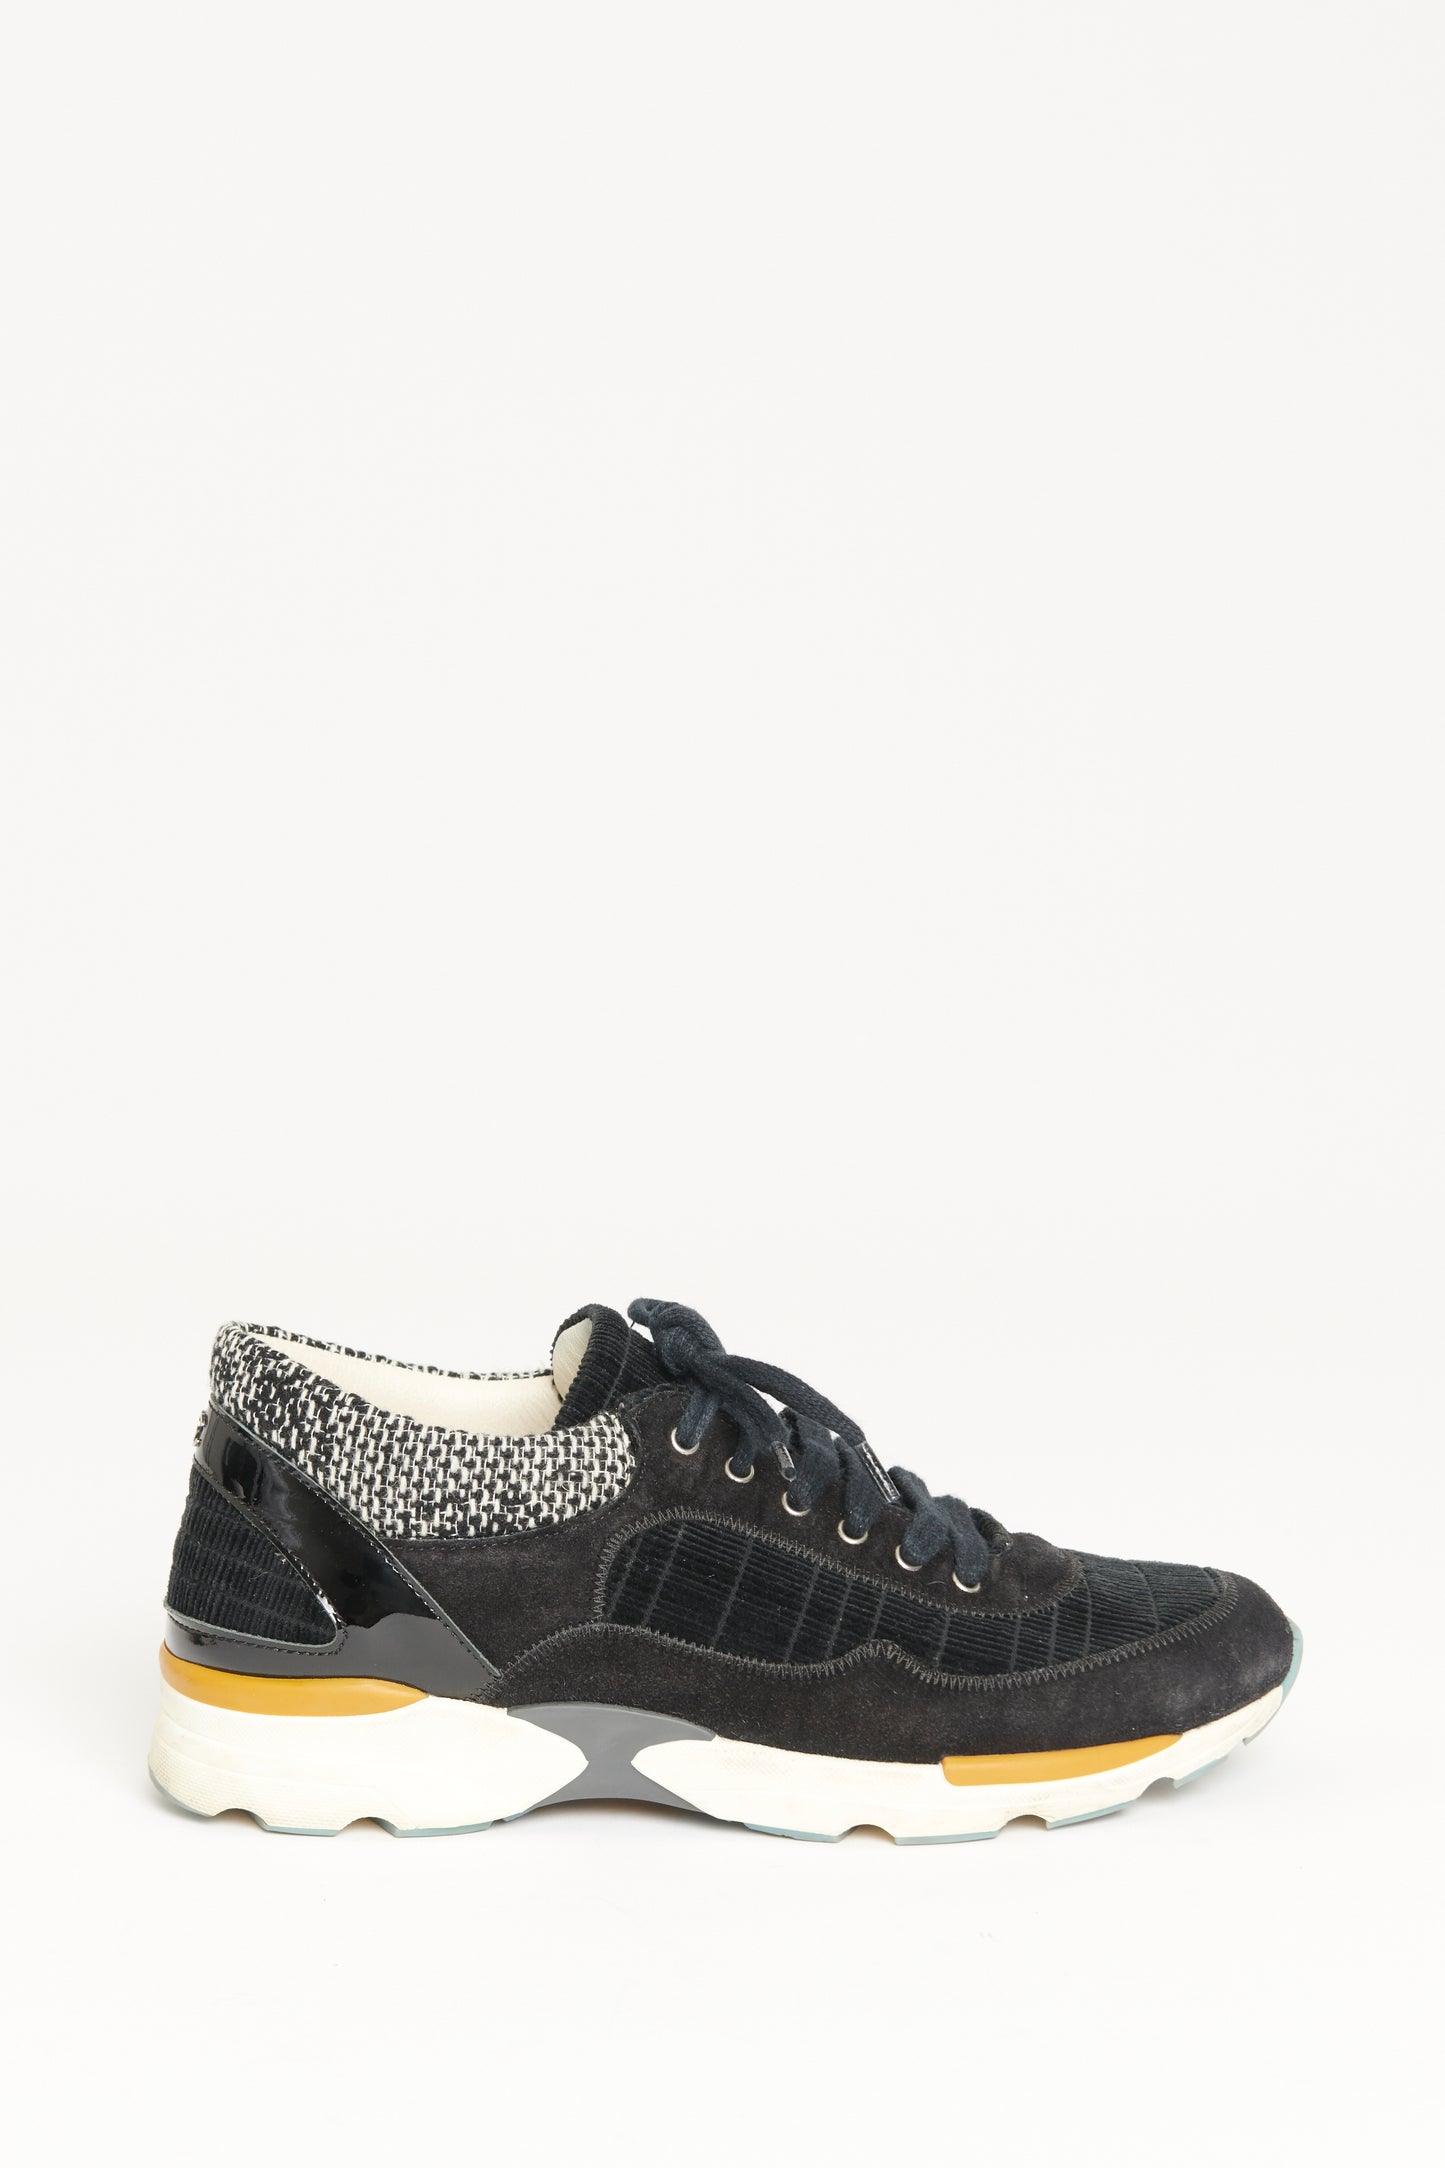 2014 Black Corduroy Preowned Lace Up Trainers